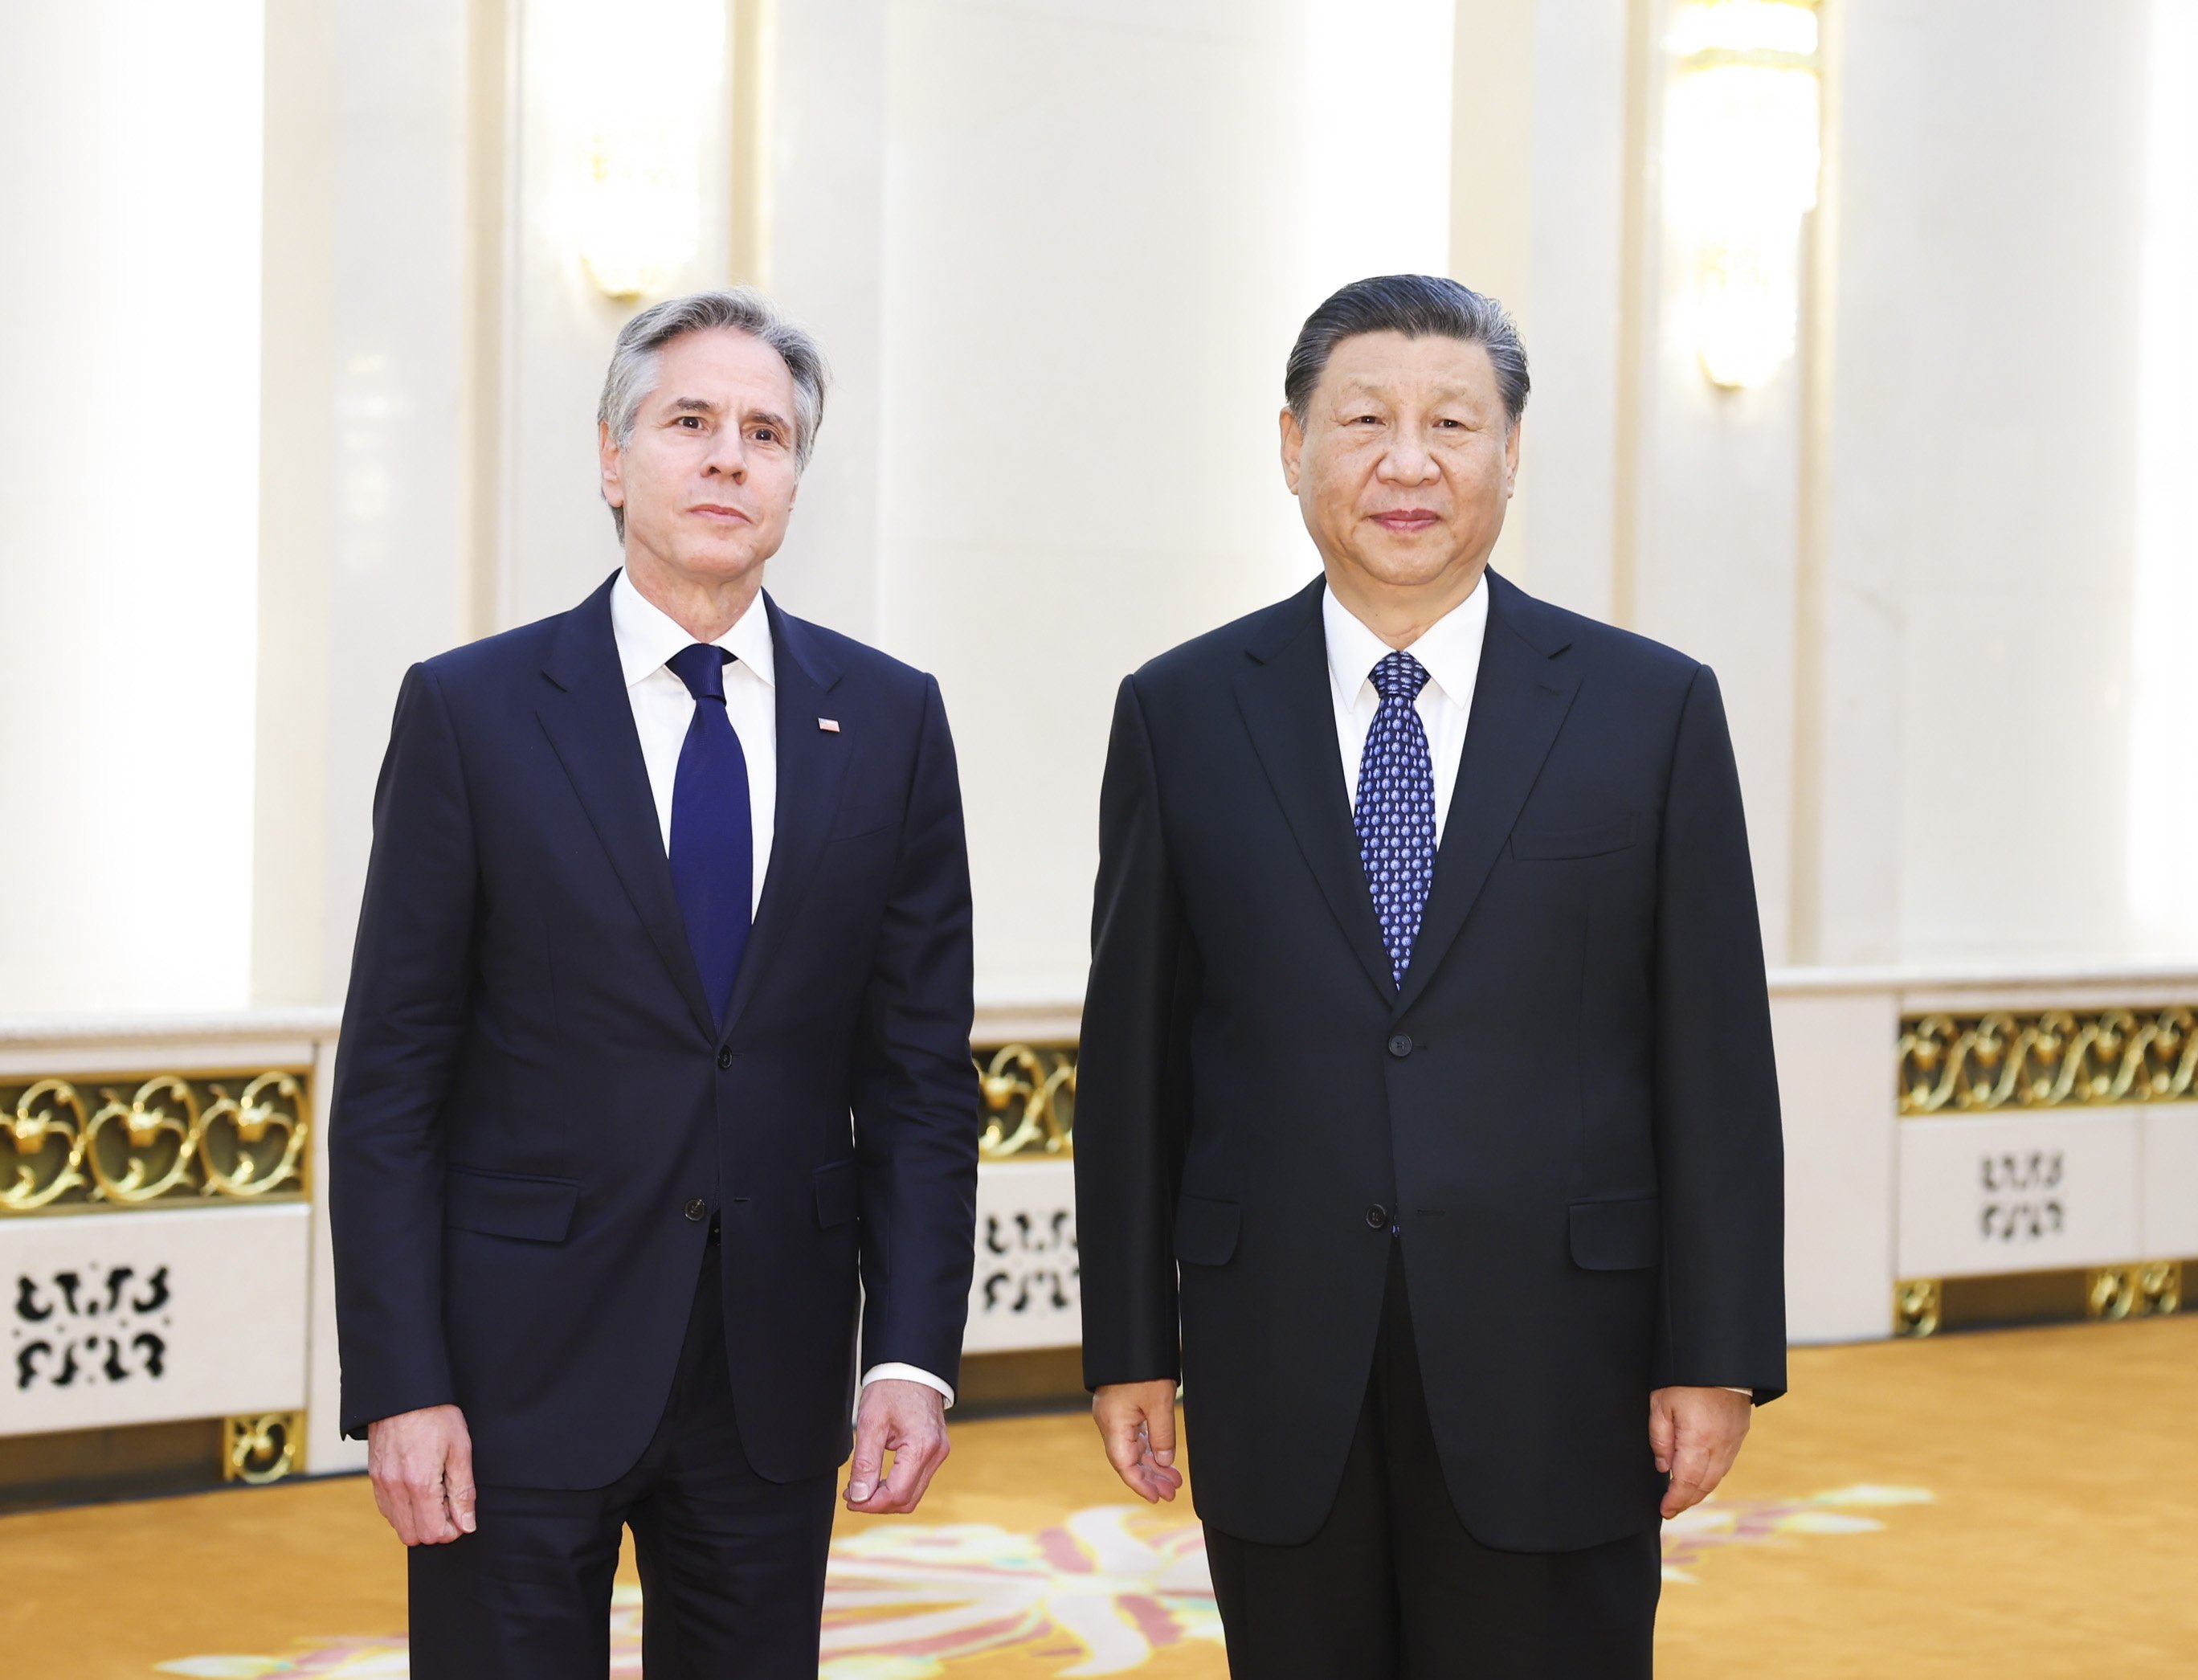 Chinese President Xi Jinping and US Secretary of State Antony Blinken at the Great Hall of the People in Beijing, China, last week. Photo: EPA-EFE/XINHUA / Huang Jingwen